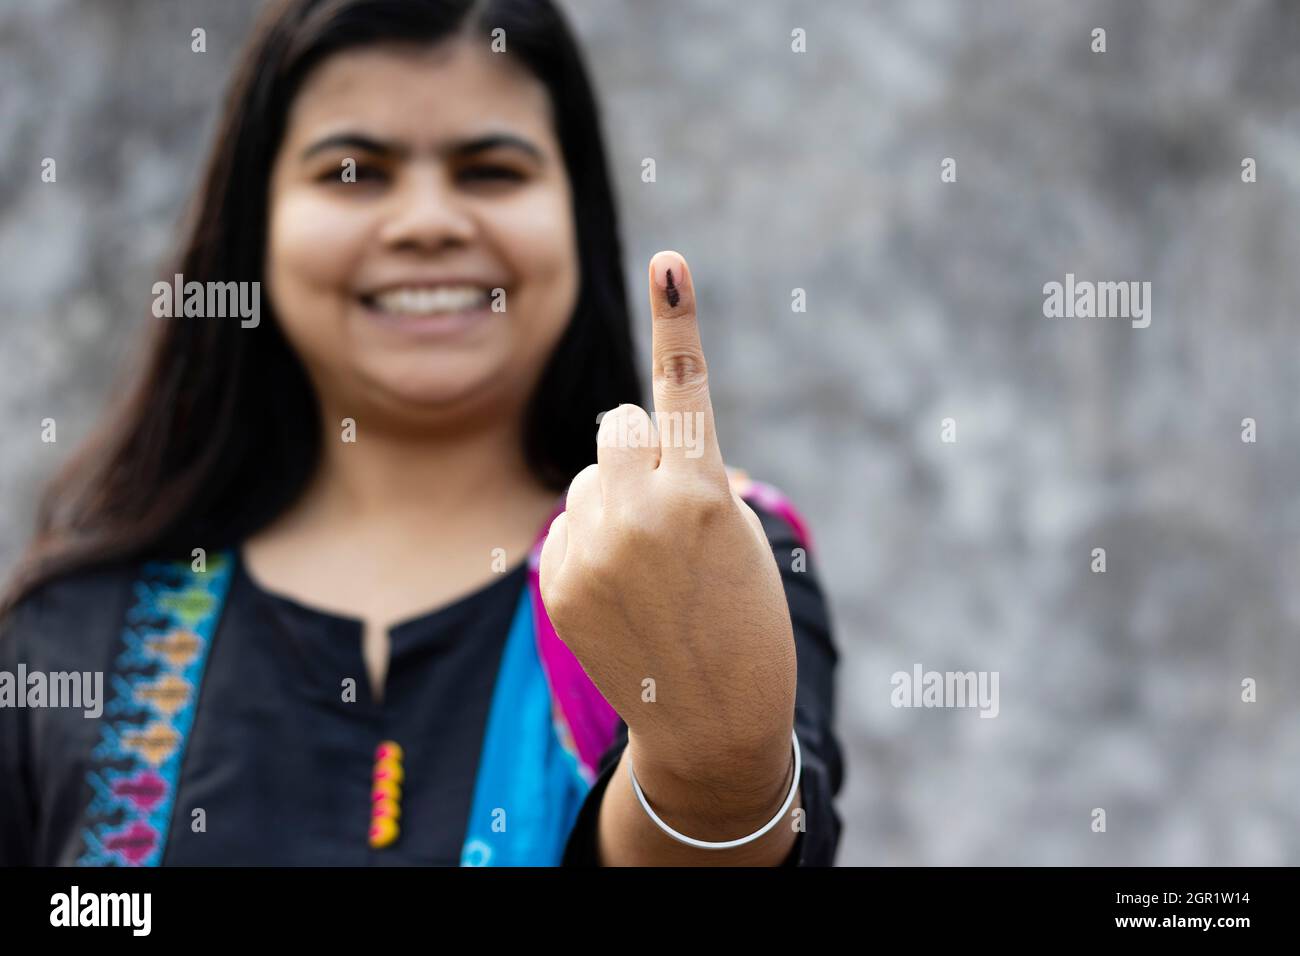 Selective Focus On Ink-marked Finger Of An Indian Woman With Smiling Face Stock Photo